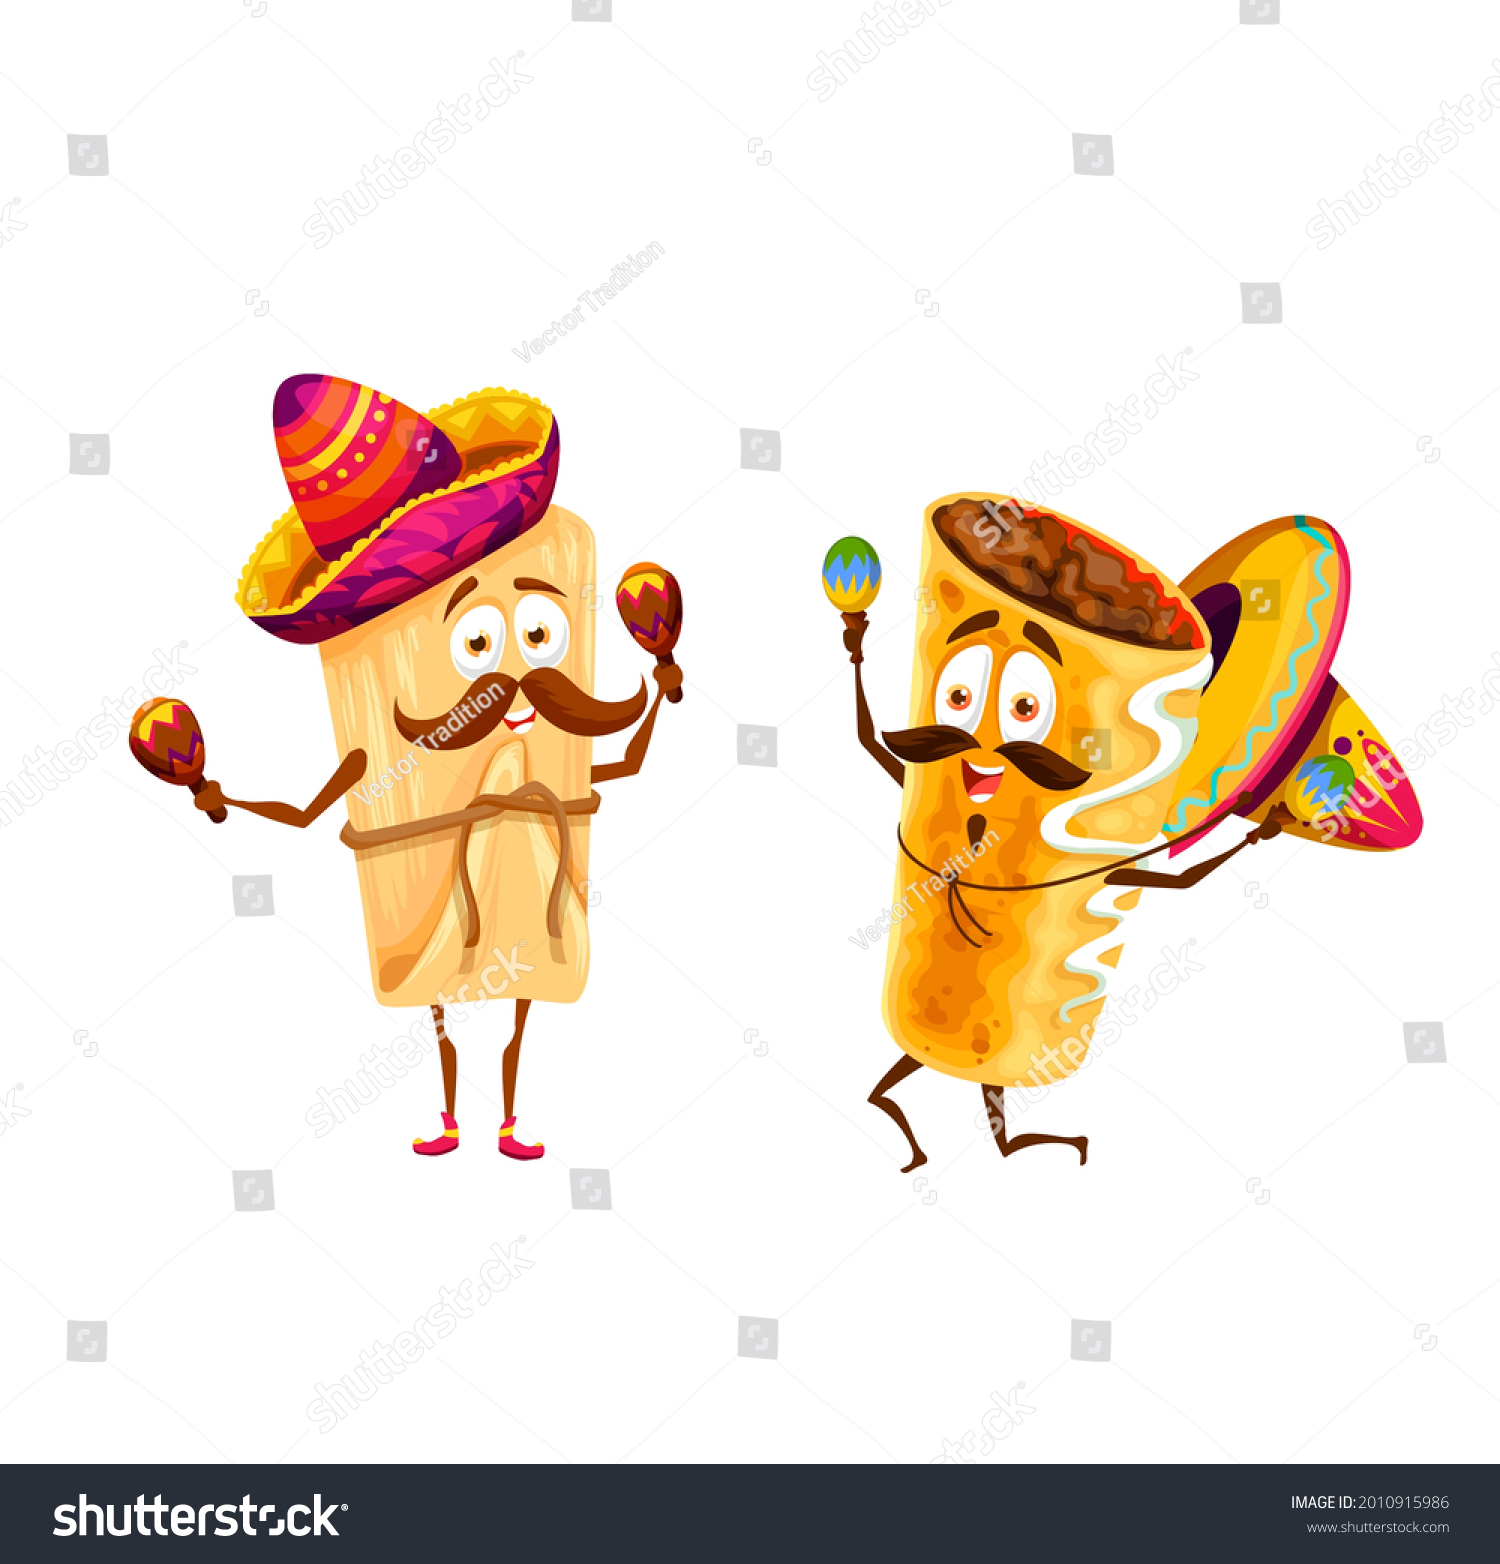 SVG of Cartoon mexican tamales and chimichanga happy characters. Vector mariachi funny musicians in sombrero playing maracas, tex mex fastfood artists with mustaches celebrate national holidays and sing svg